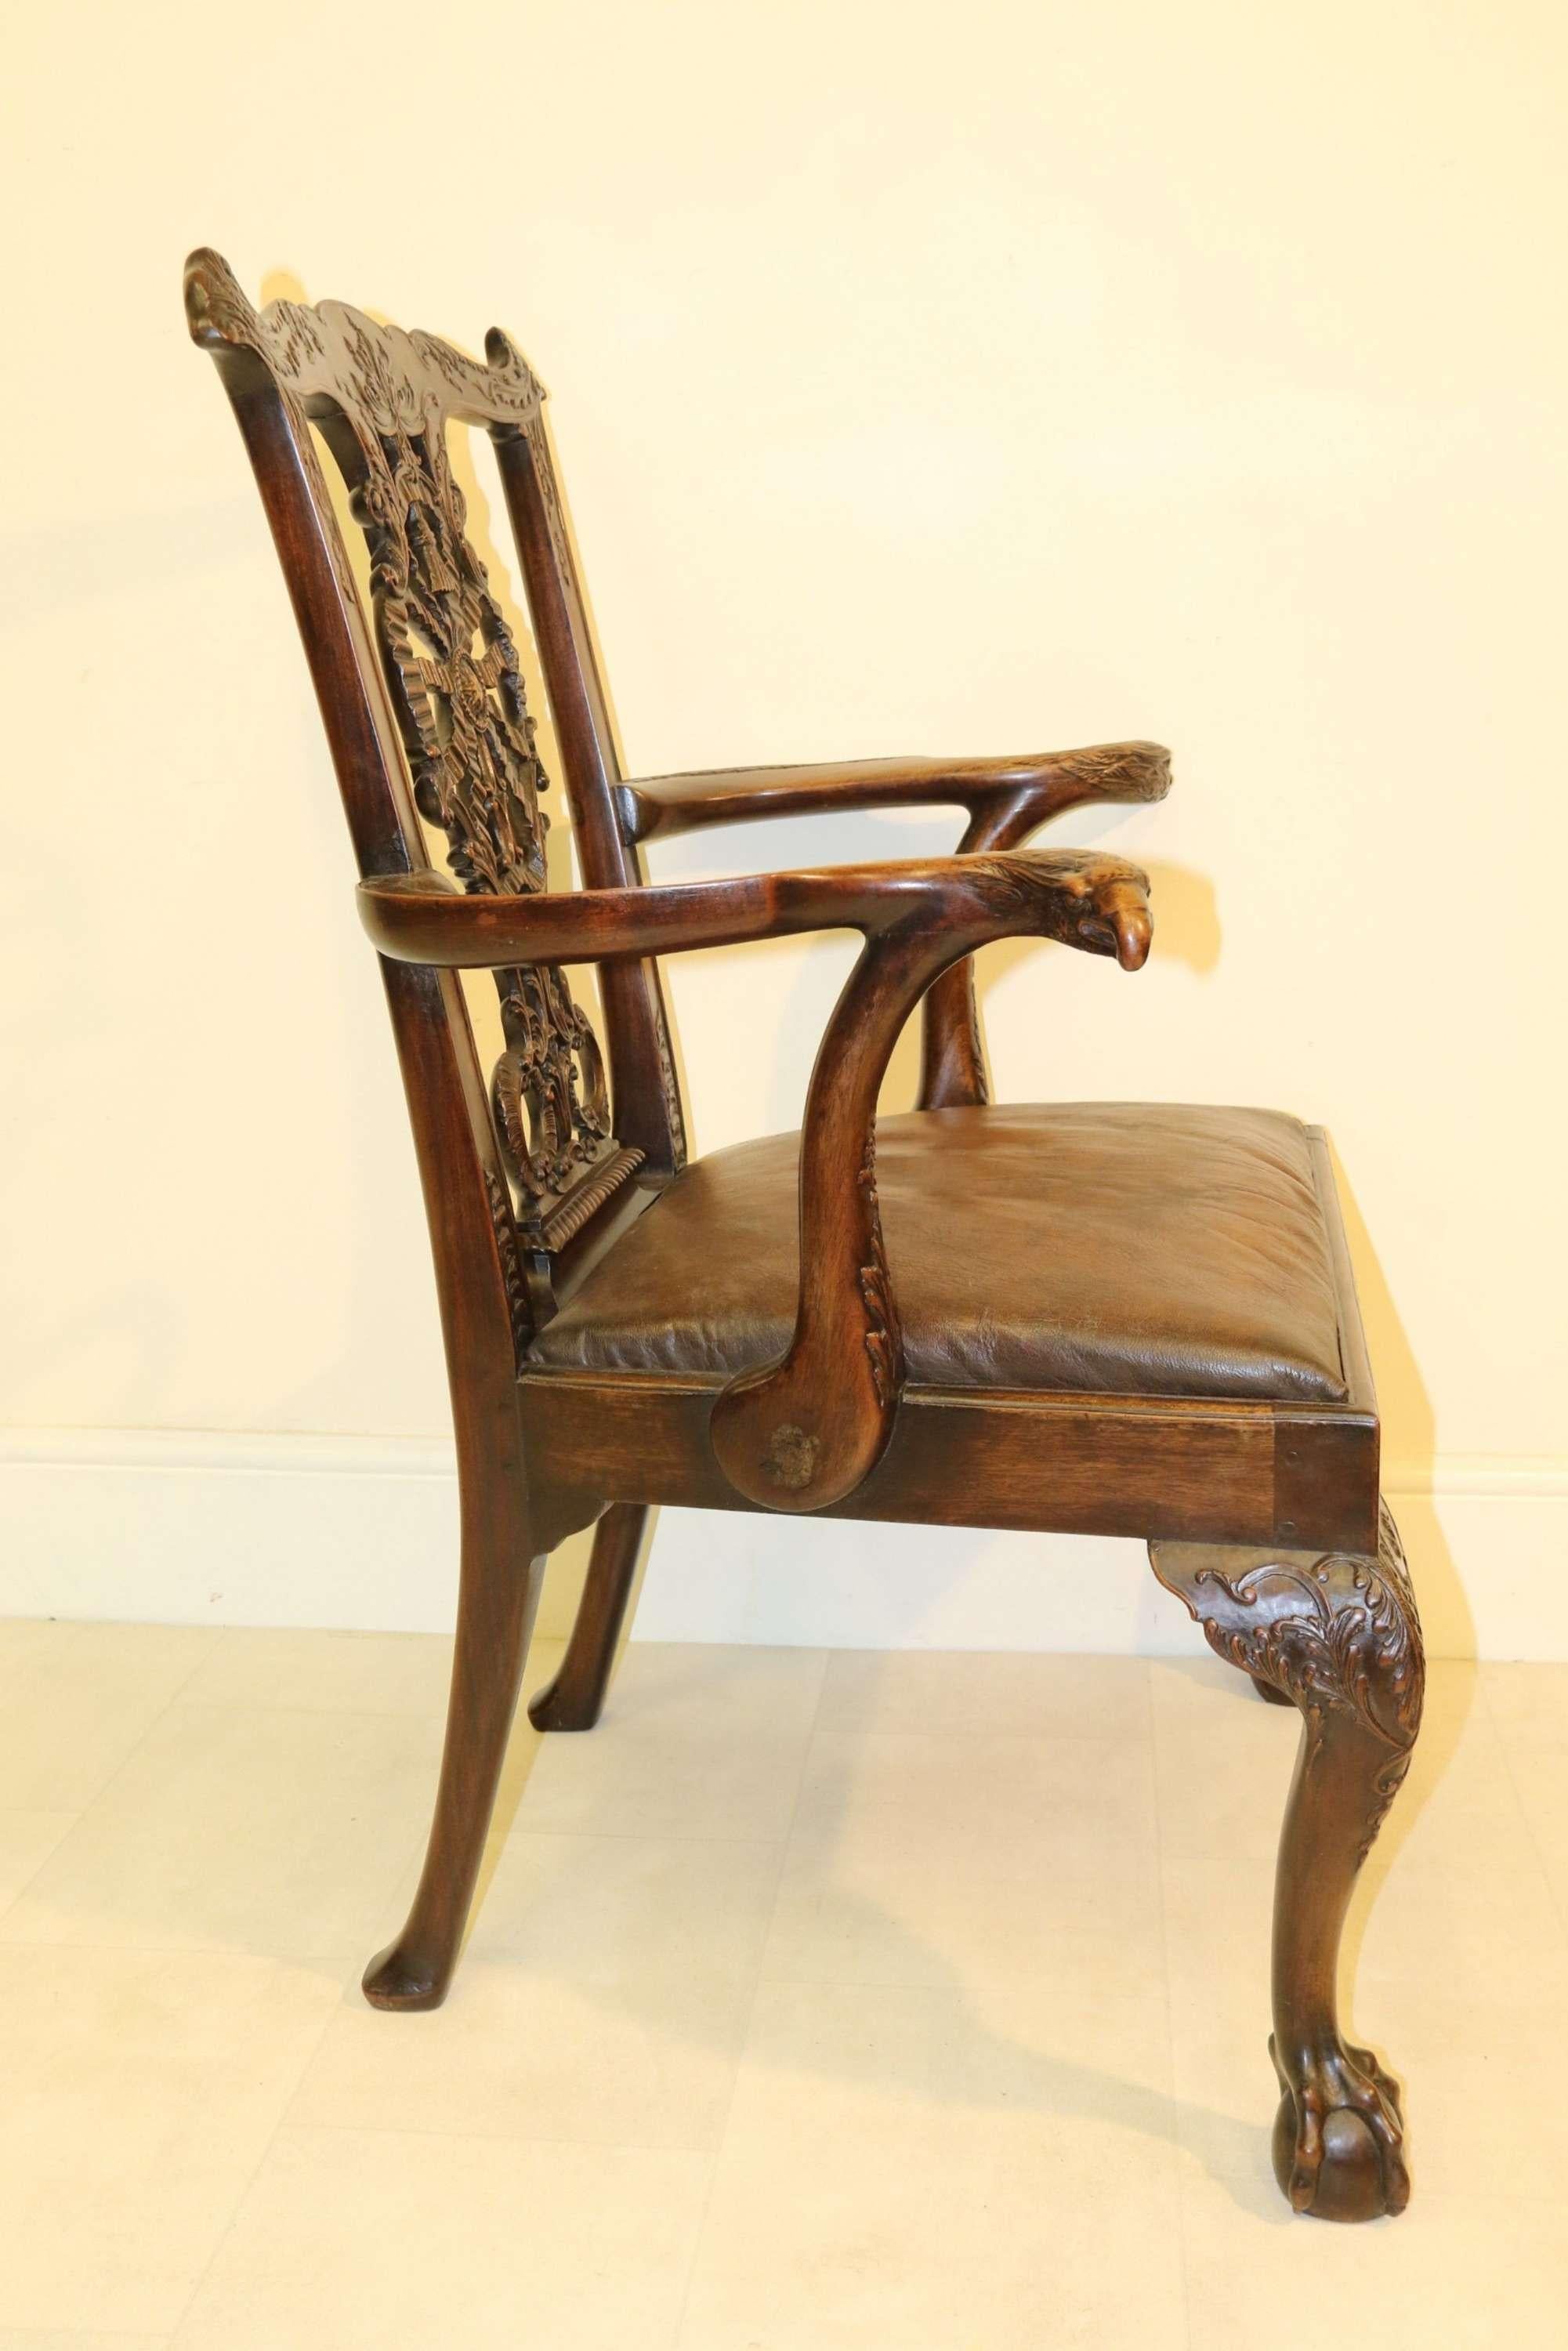 A Fine 19th Century Chippendale Style Armchair

This superb 19th-century example of a top-quality Chippendale open armchair is made from rich dense Cuban mahogany. The workmanship in the intricately carved details on this chair is equal to an